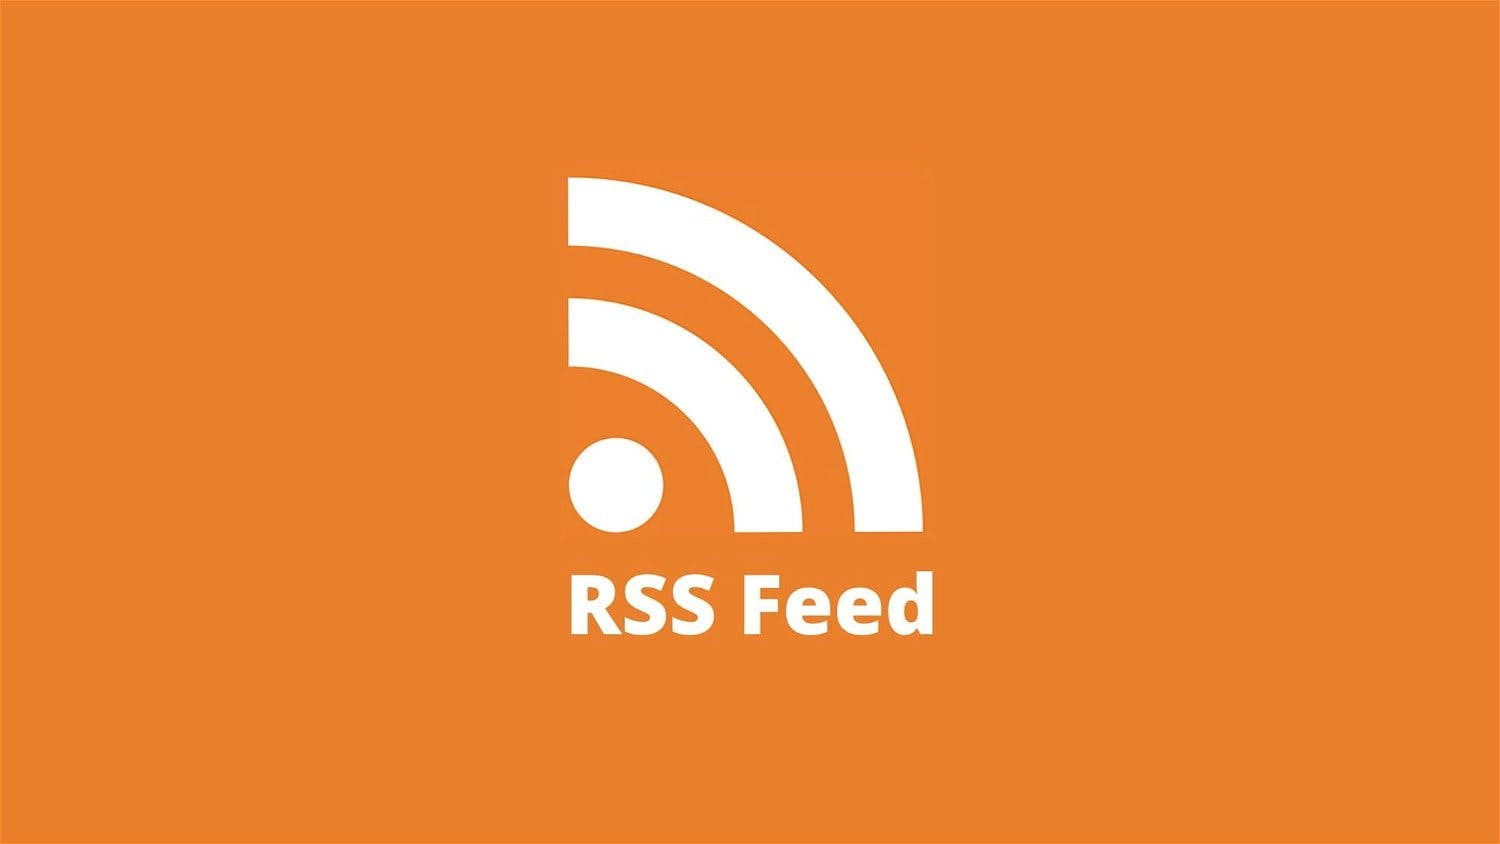 About RSS